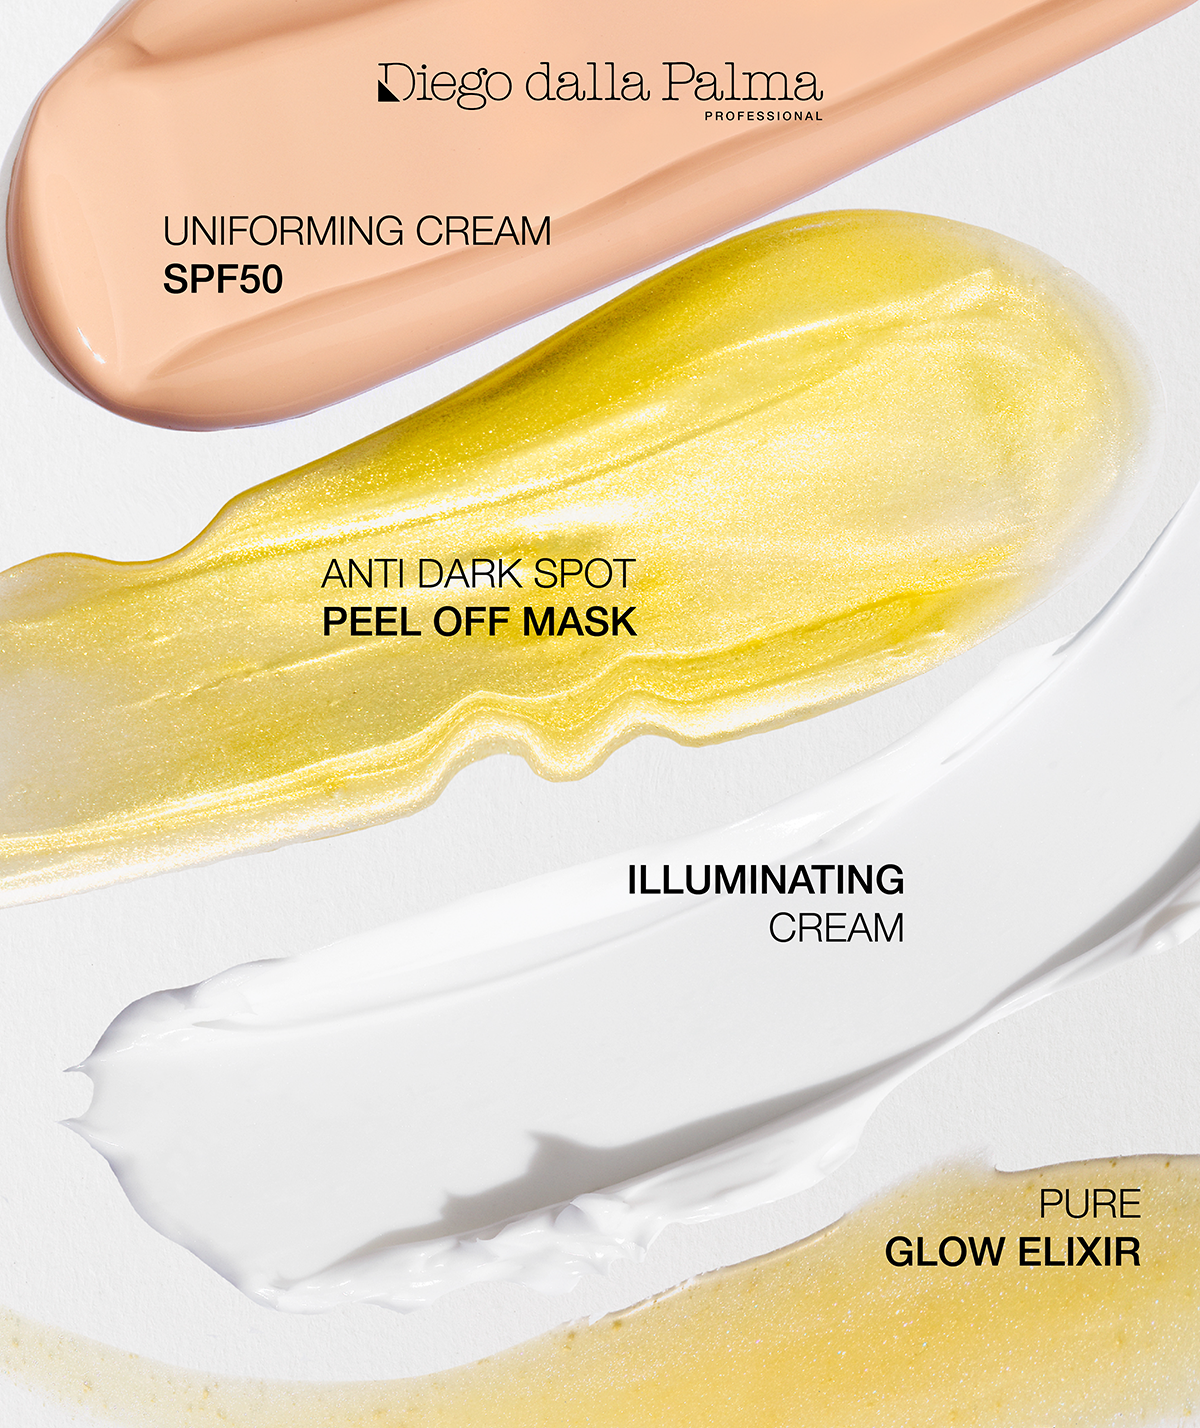 Diego dalla Palma Resurface2 Bright C is here to illuminate your complexion 15